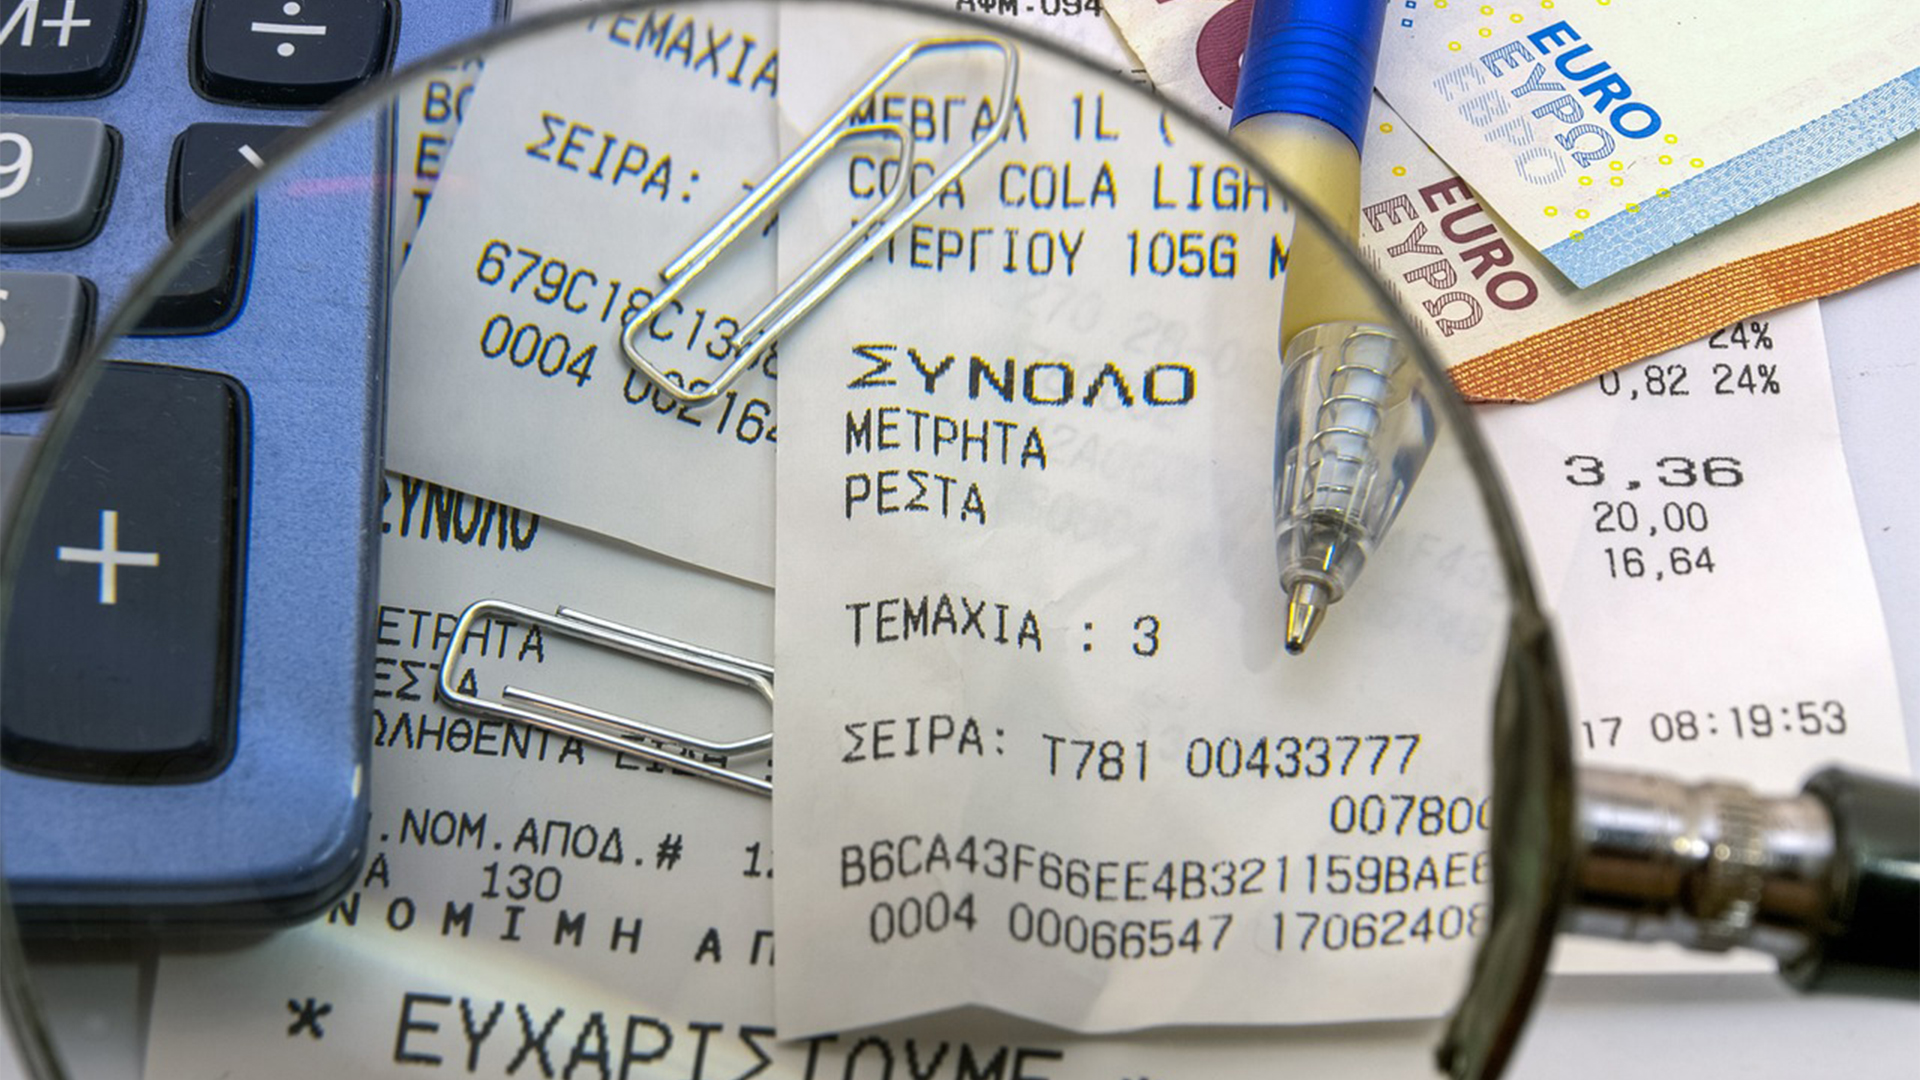 receipts under magnifying glass